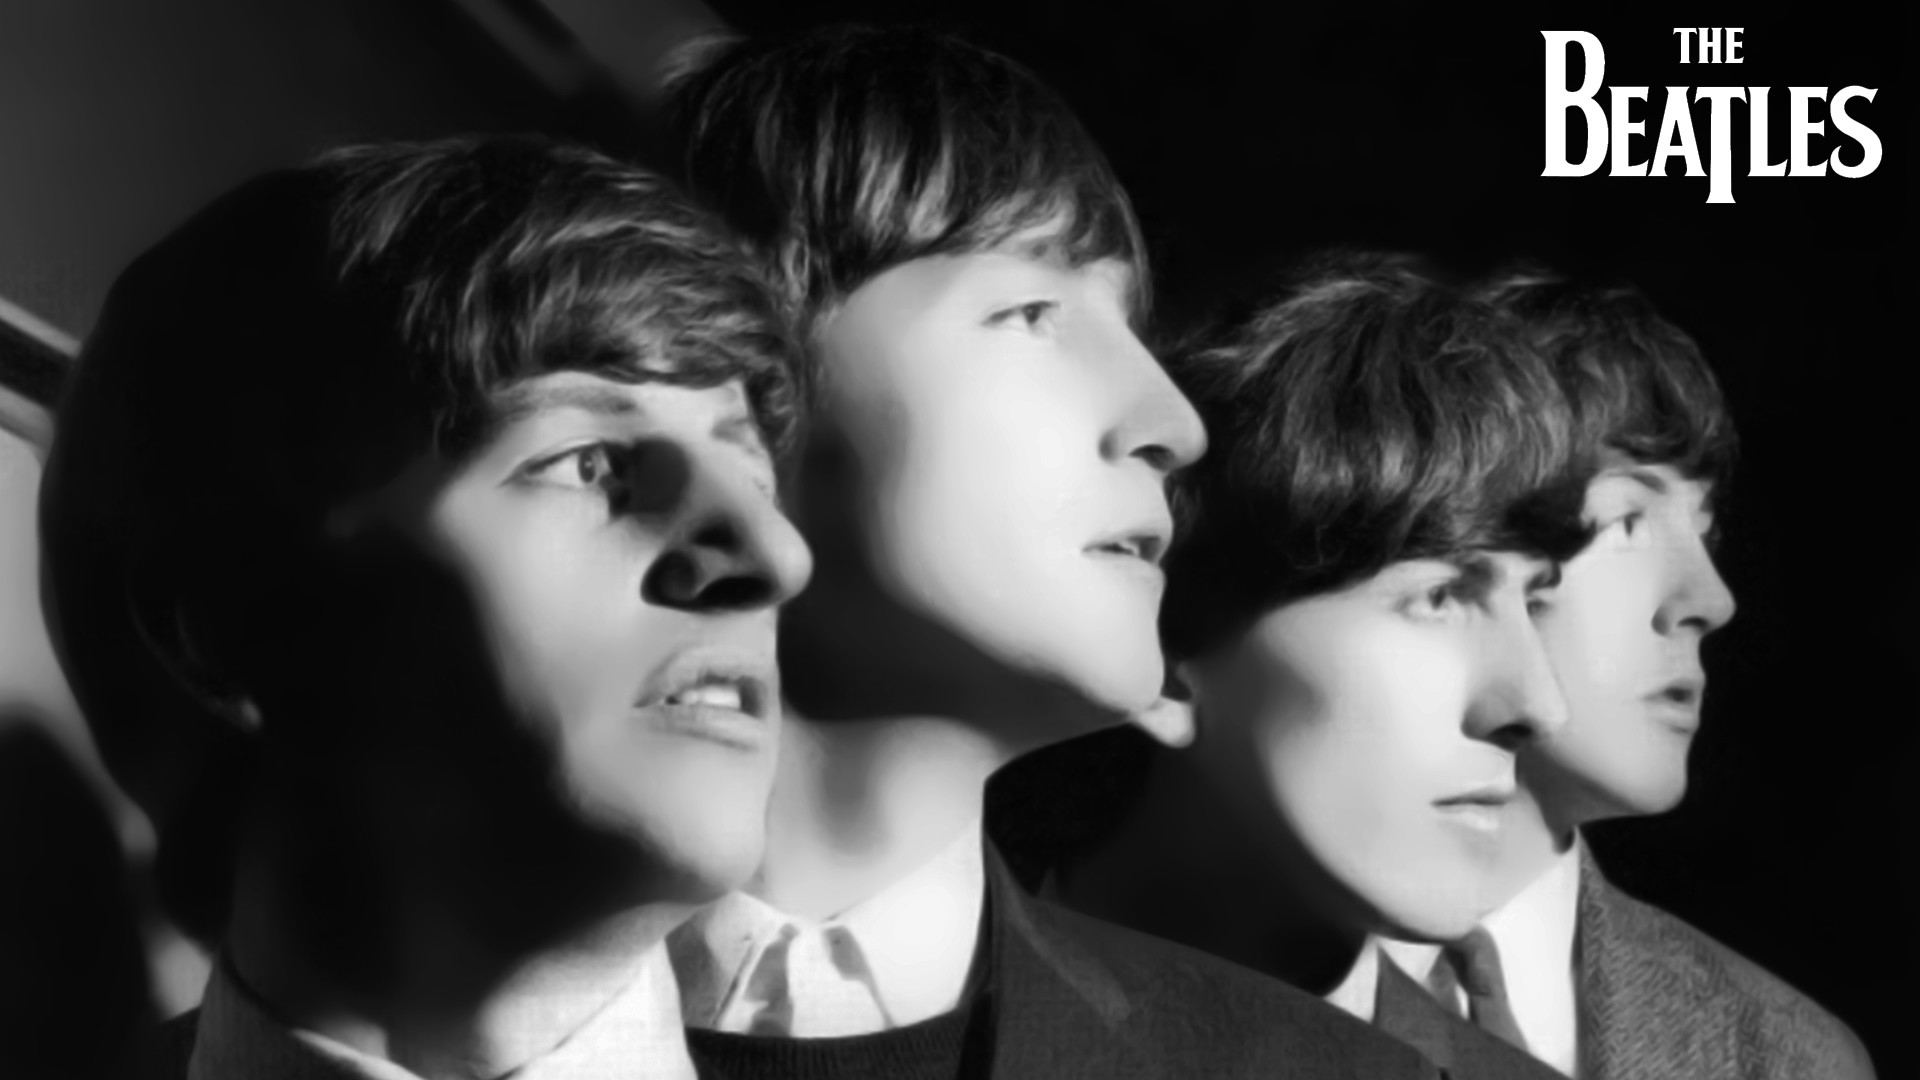 The Beatles Wallpapers HD Group 88